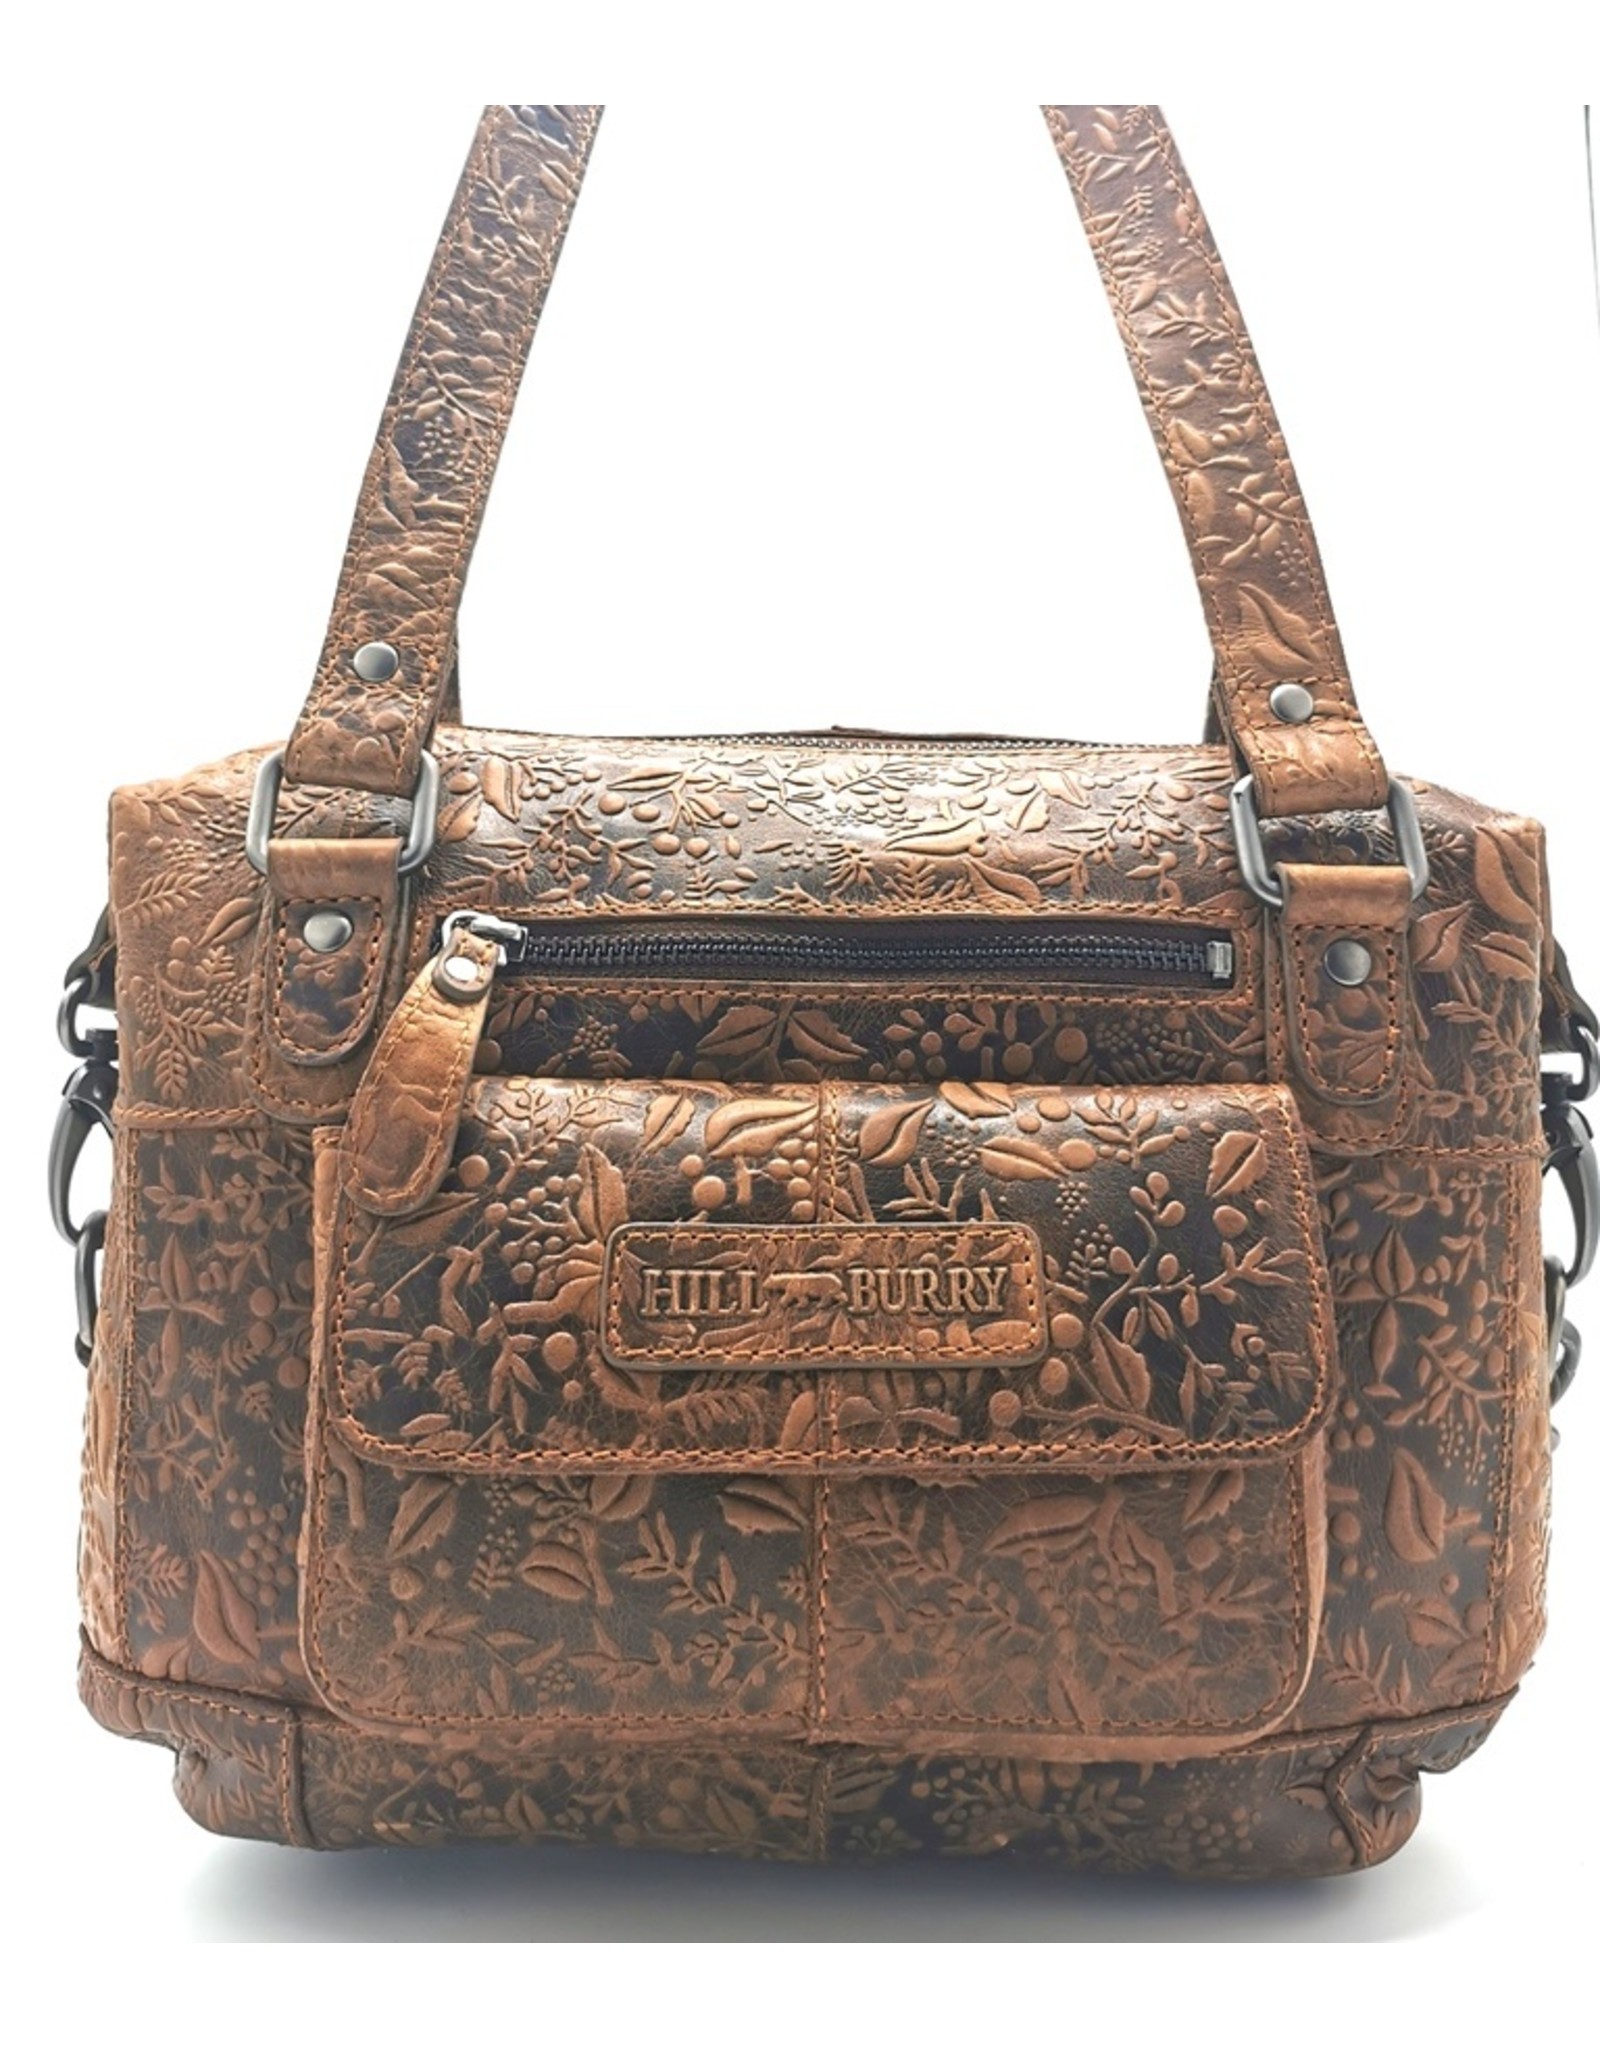 HillBurry Leather Shoulder bags  leather crossbody bags - HillBurry Leather Shoulder Bag with Embossed Floral Print Brown